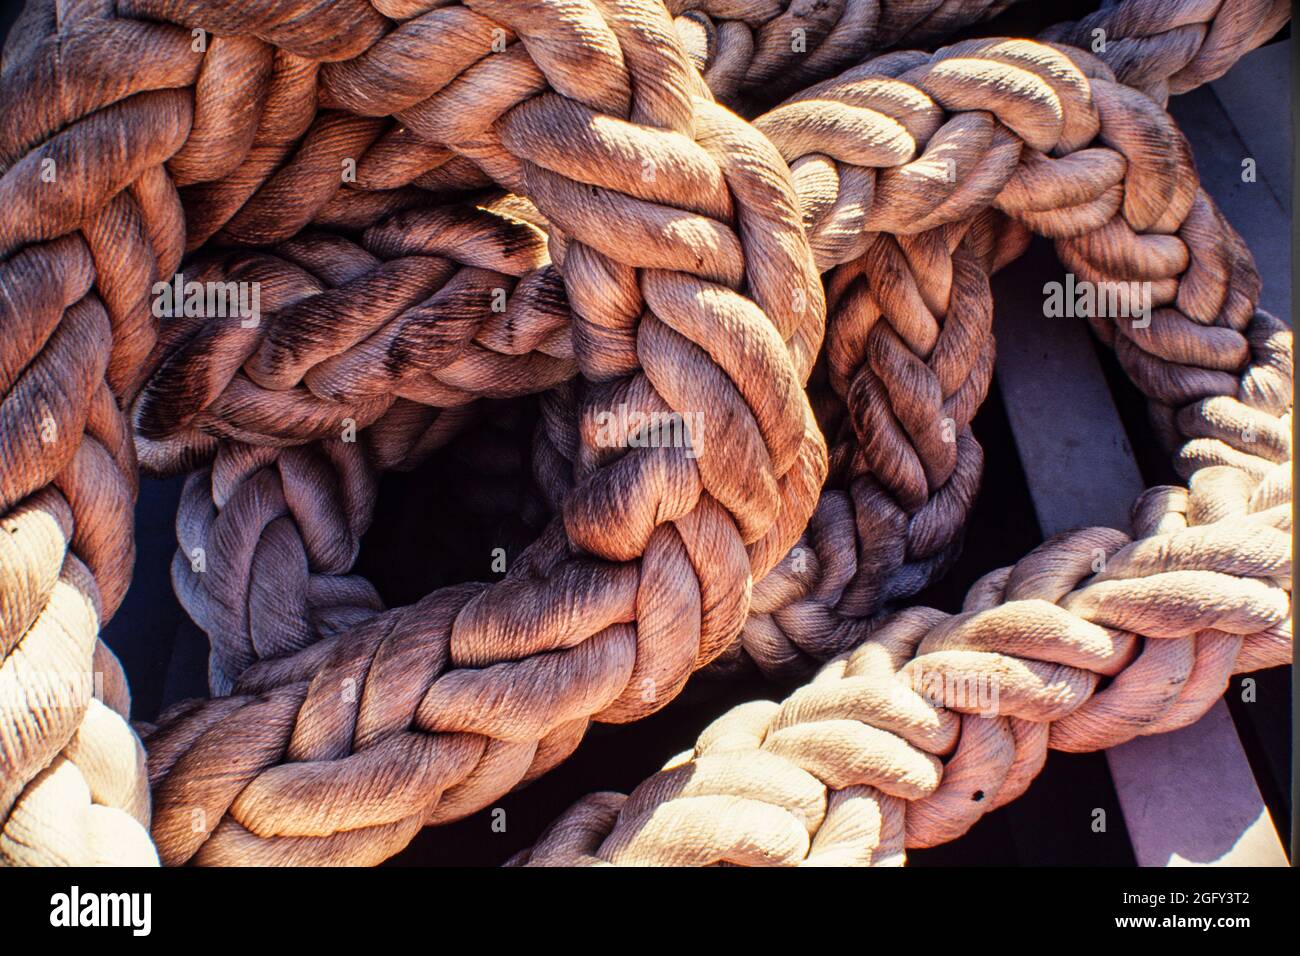 Very thick rope used at oil platform. Stock Photo